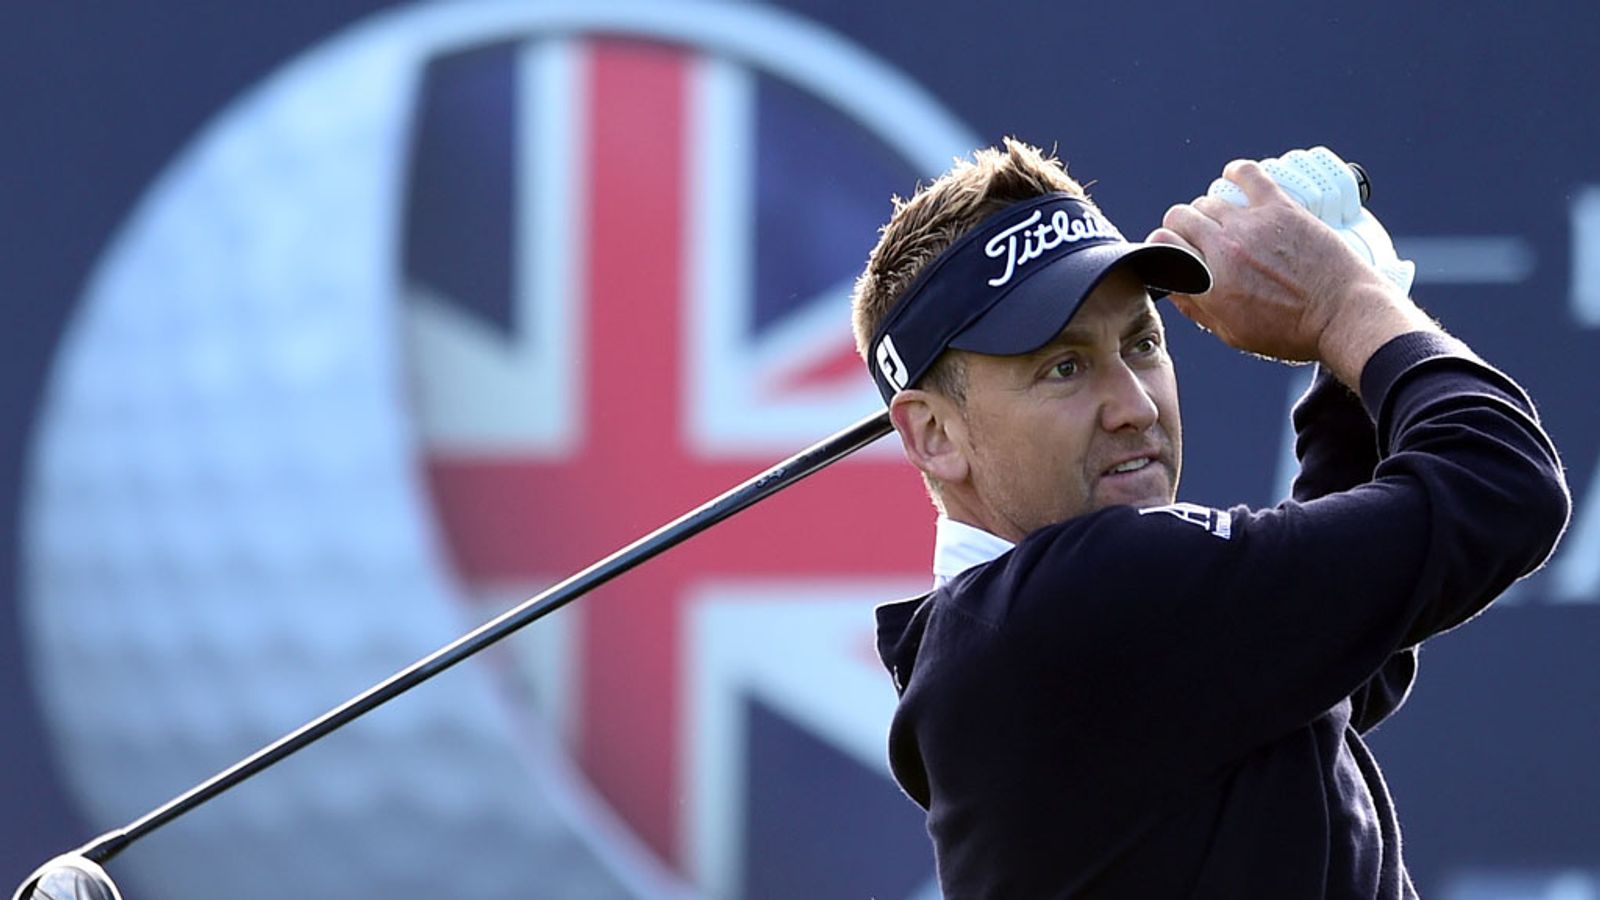 British Masters Ian Poulter added to starstudded field Golf News